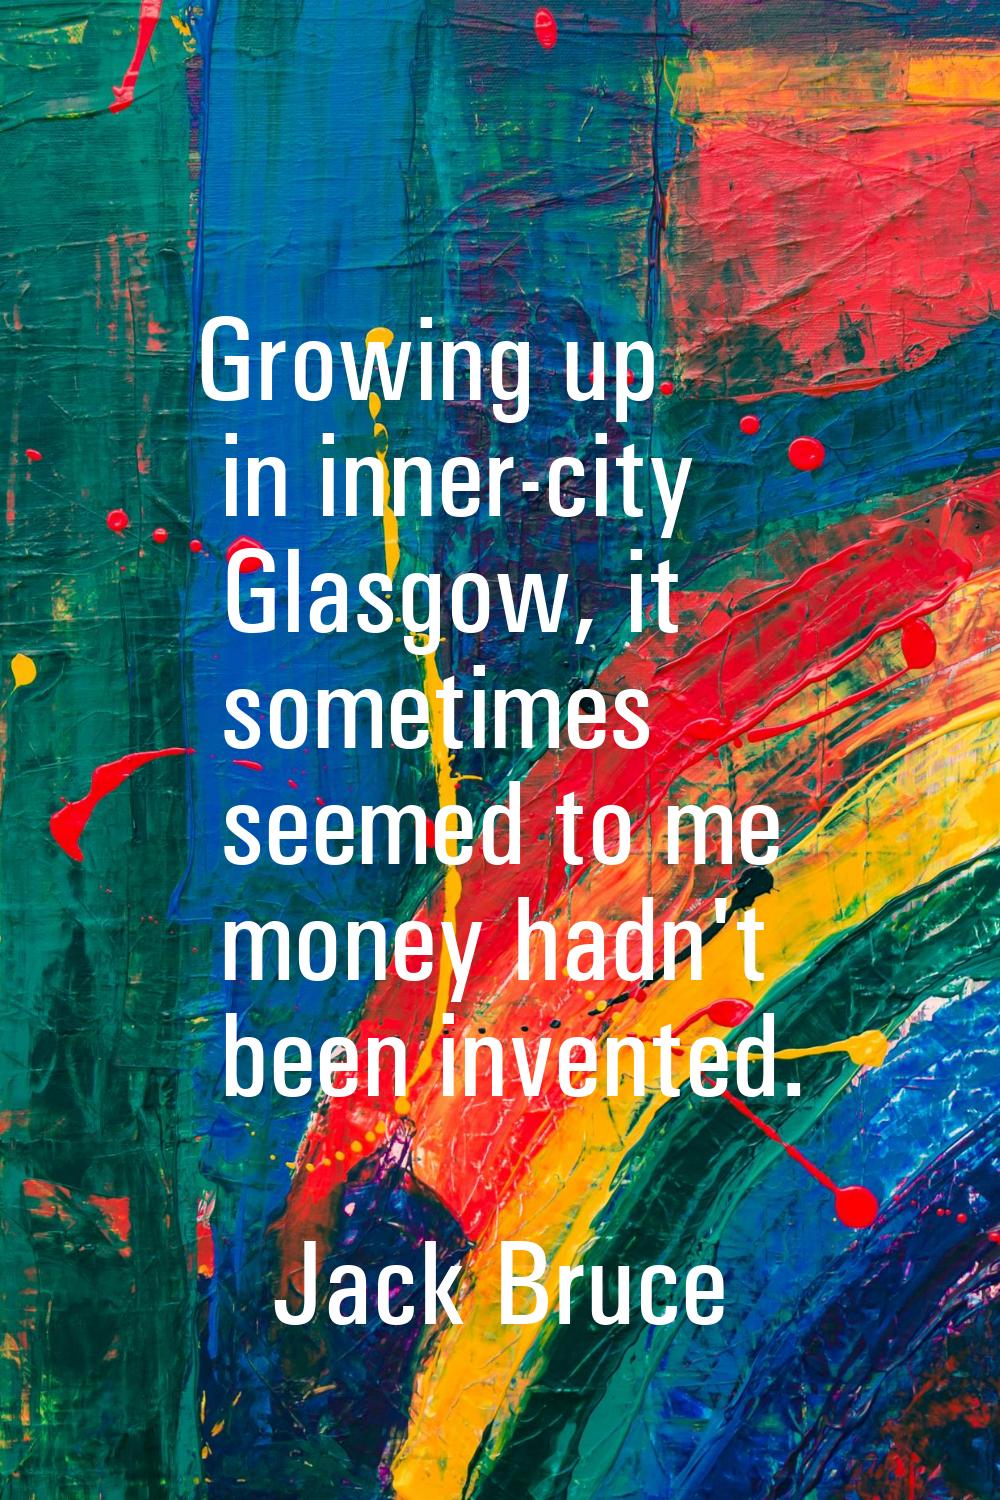 Growing up in inner-city Glasgow, it sometimes seemed to me money hadn't been invented.